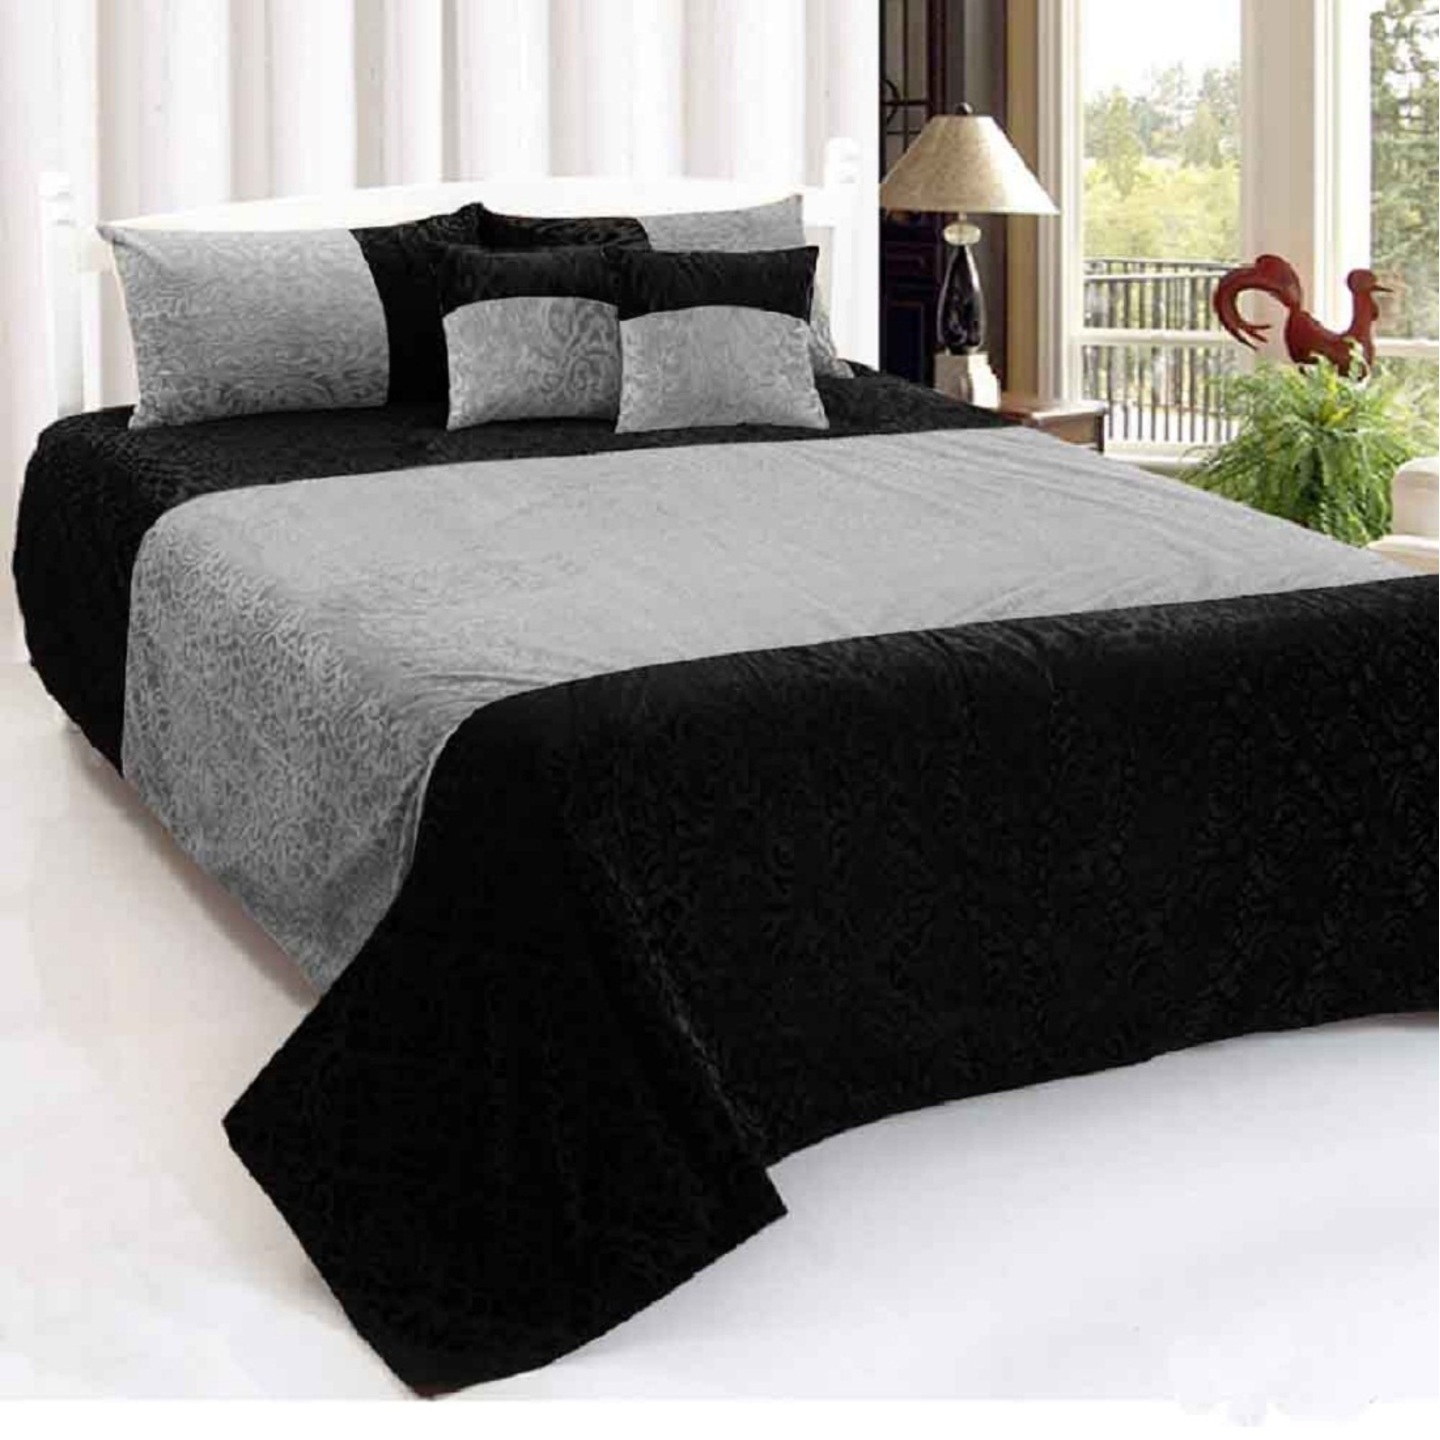 Handtex Home Black Grey Velvet Double Bedsheet,2 cushion cover and 2 pillow cover